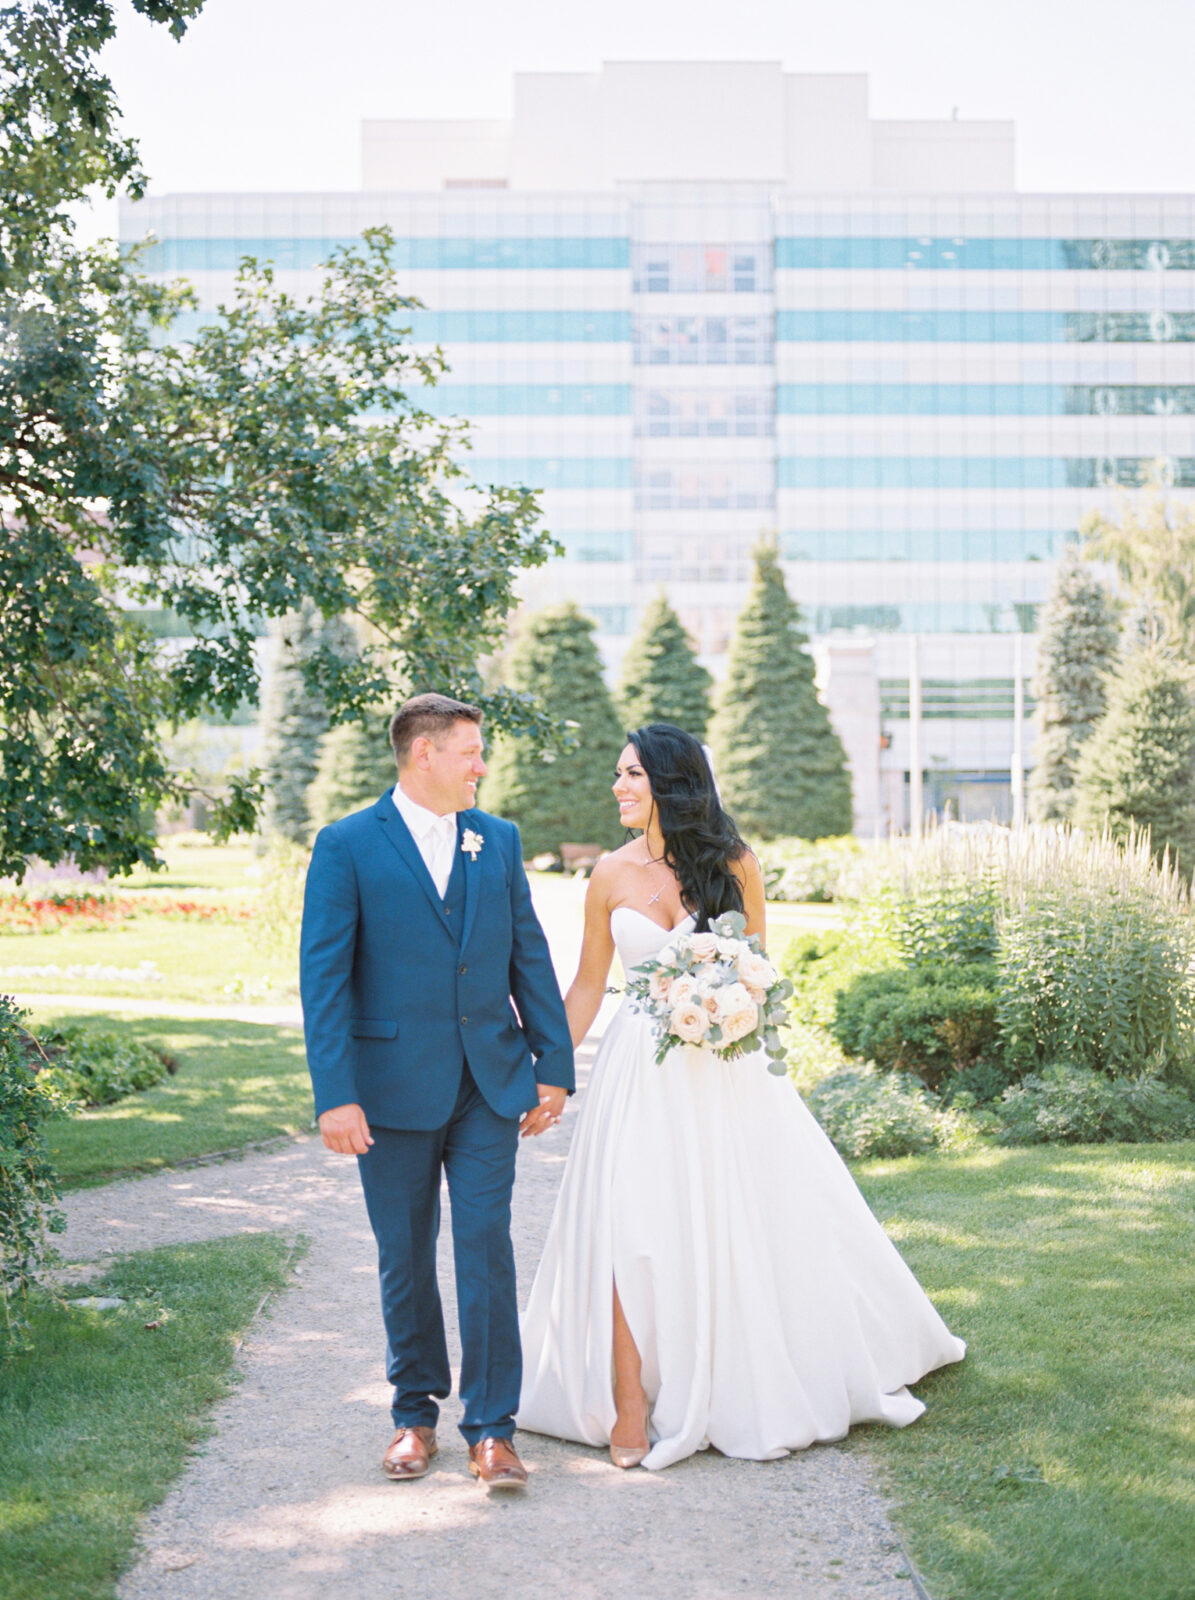 wedding portraits in park at summertime